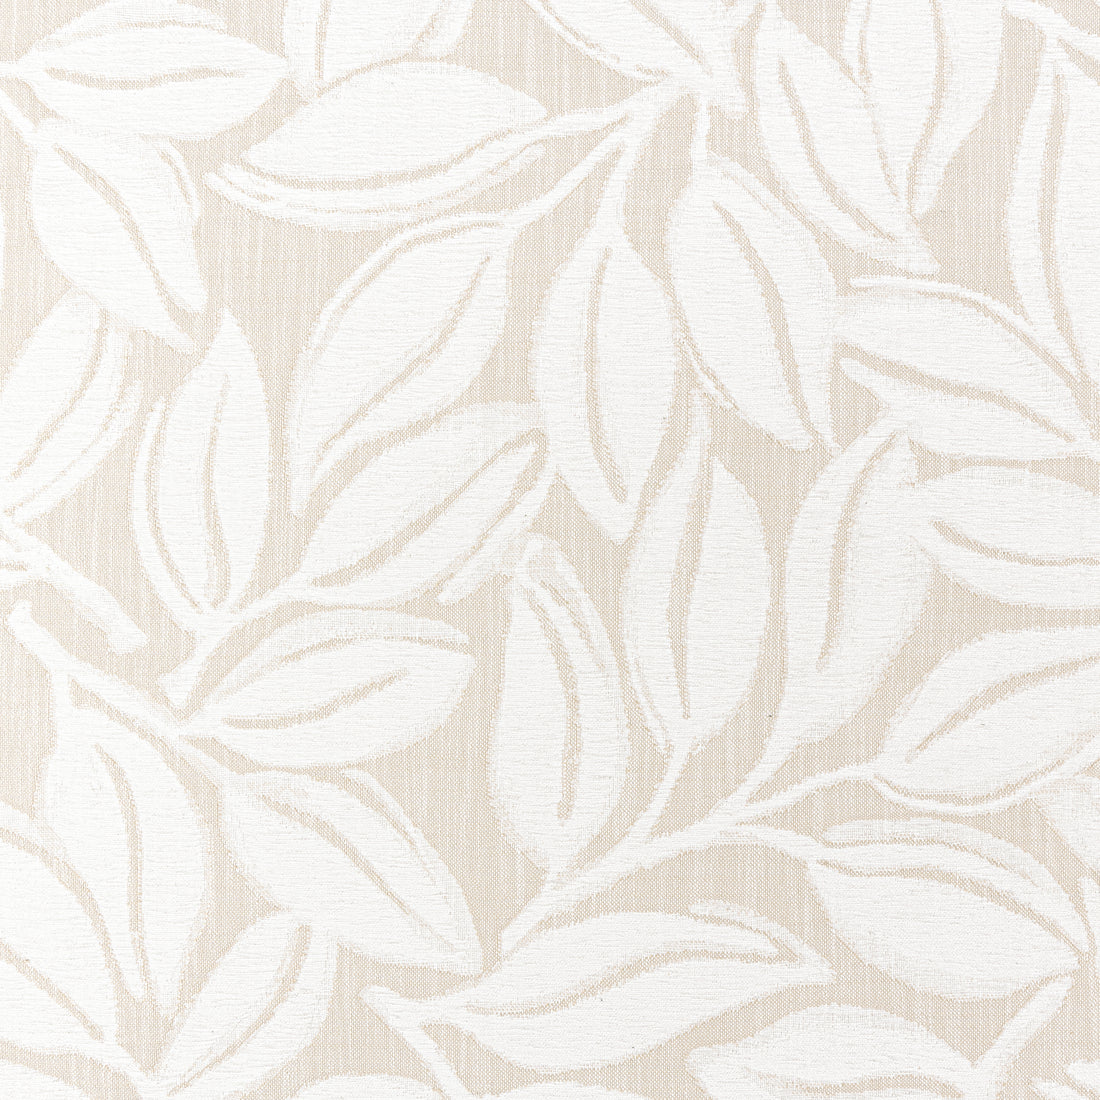 Kona fabric in flax color - pattern number W8808 - by Thibaut in the Haven collection